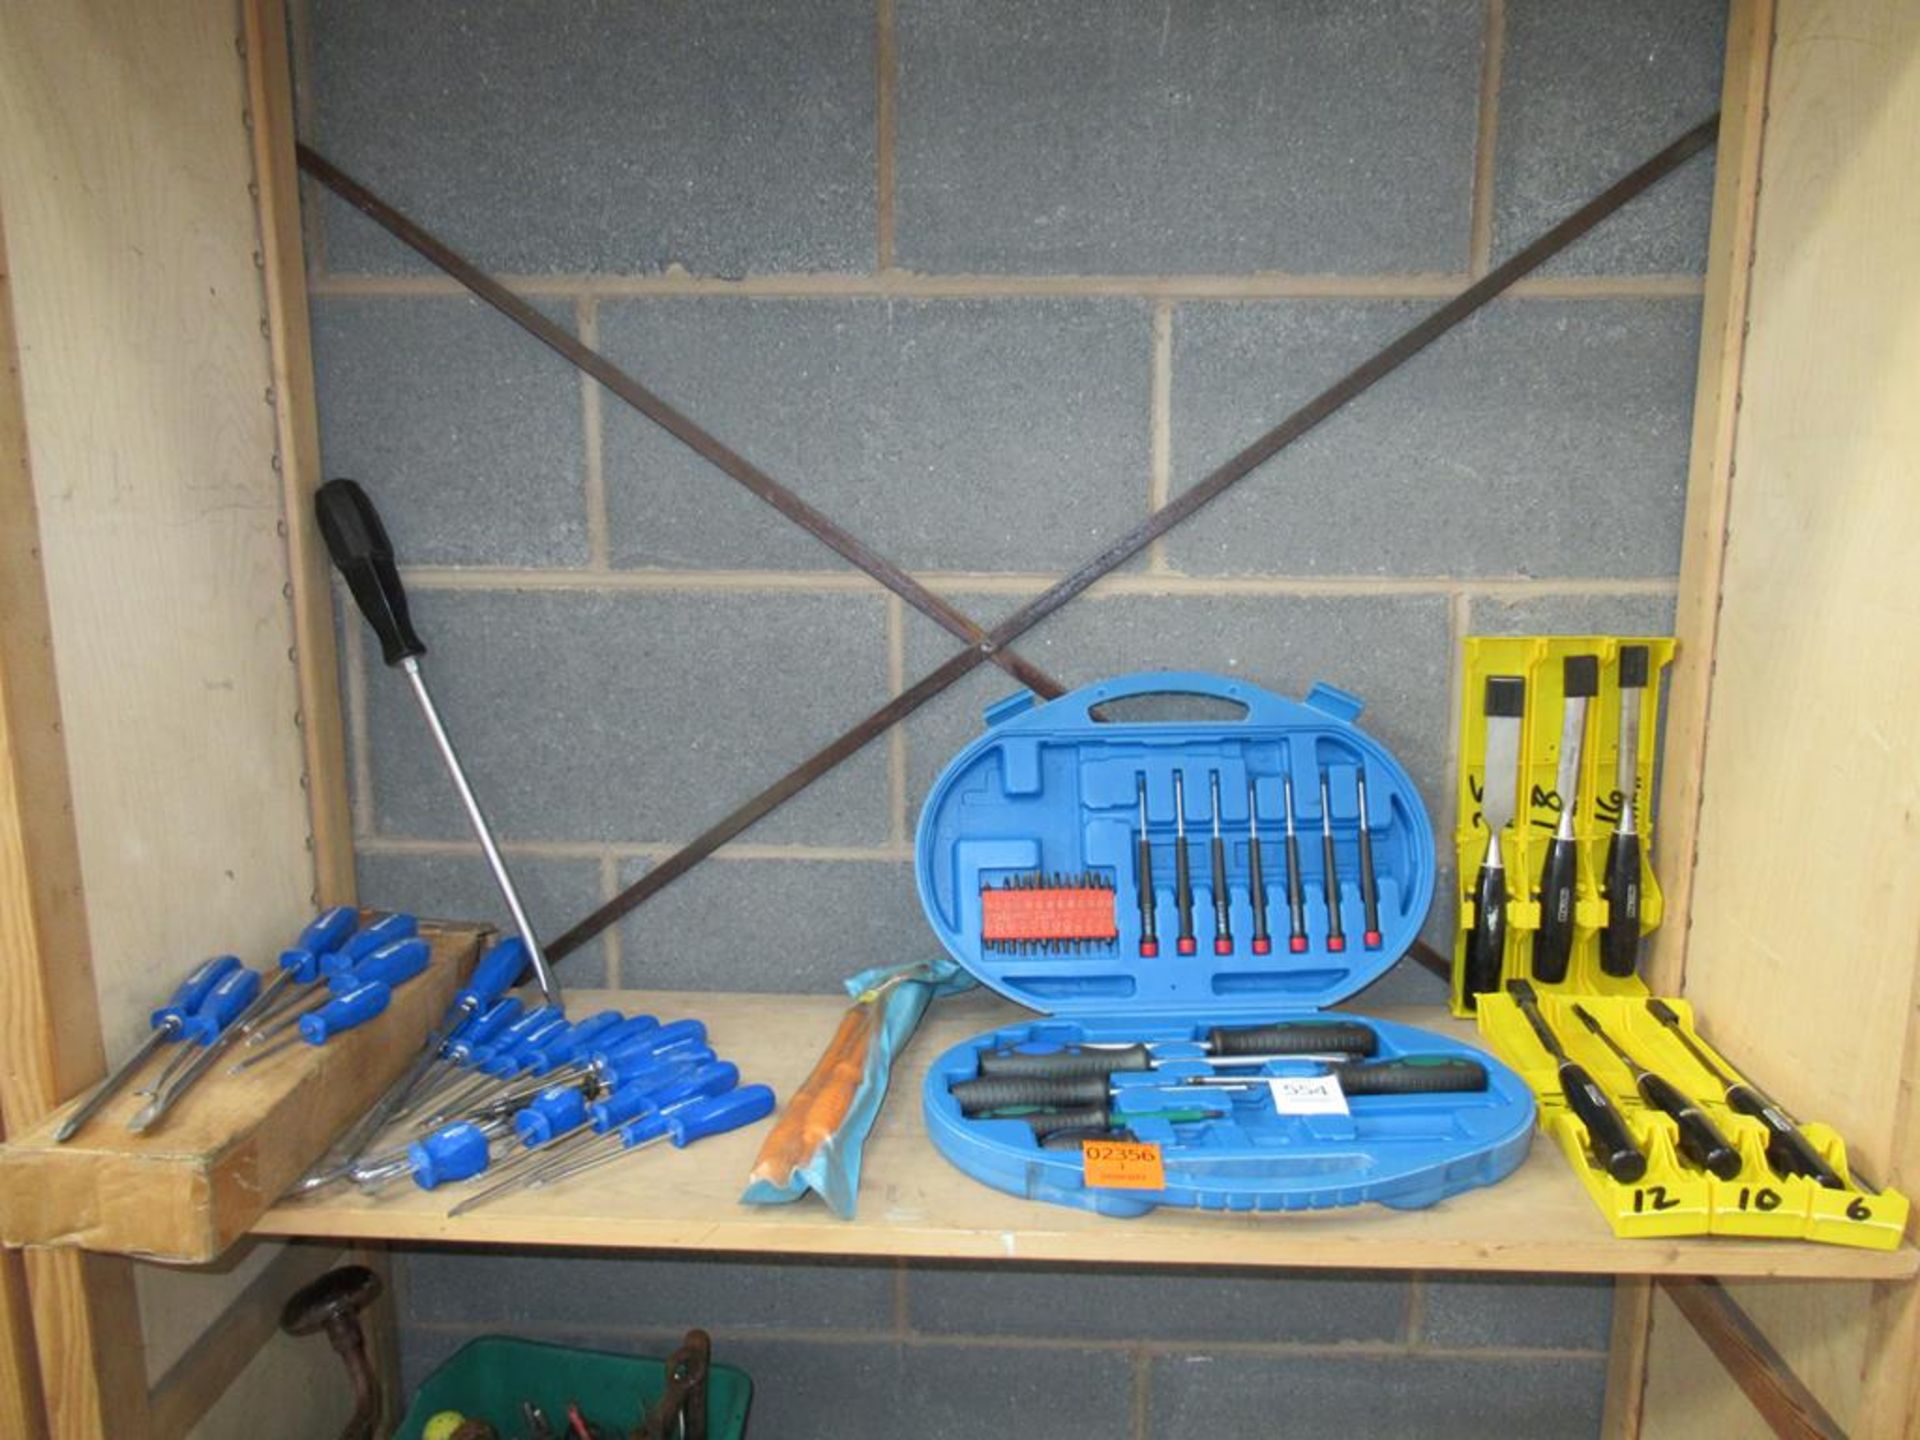 Shelf to contain Various Screw Drivers and Stanley Chisel Set